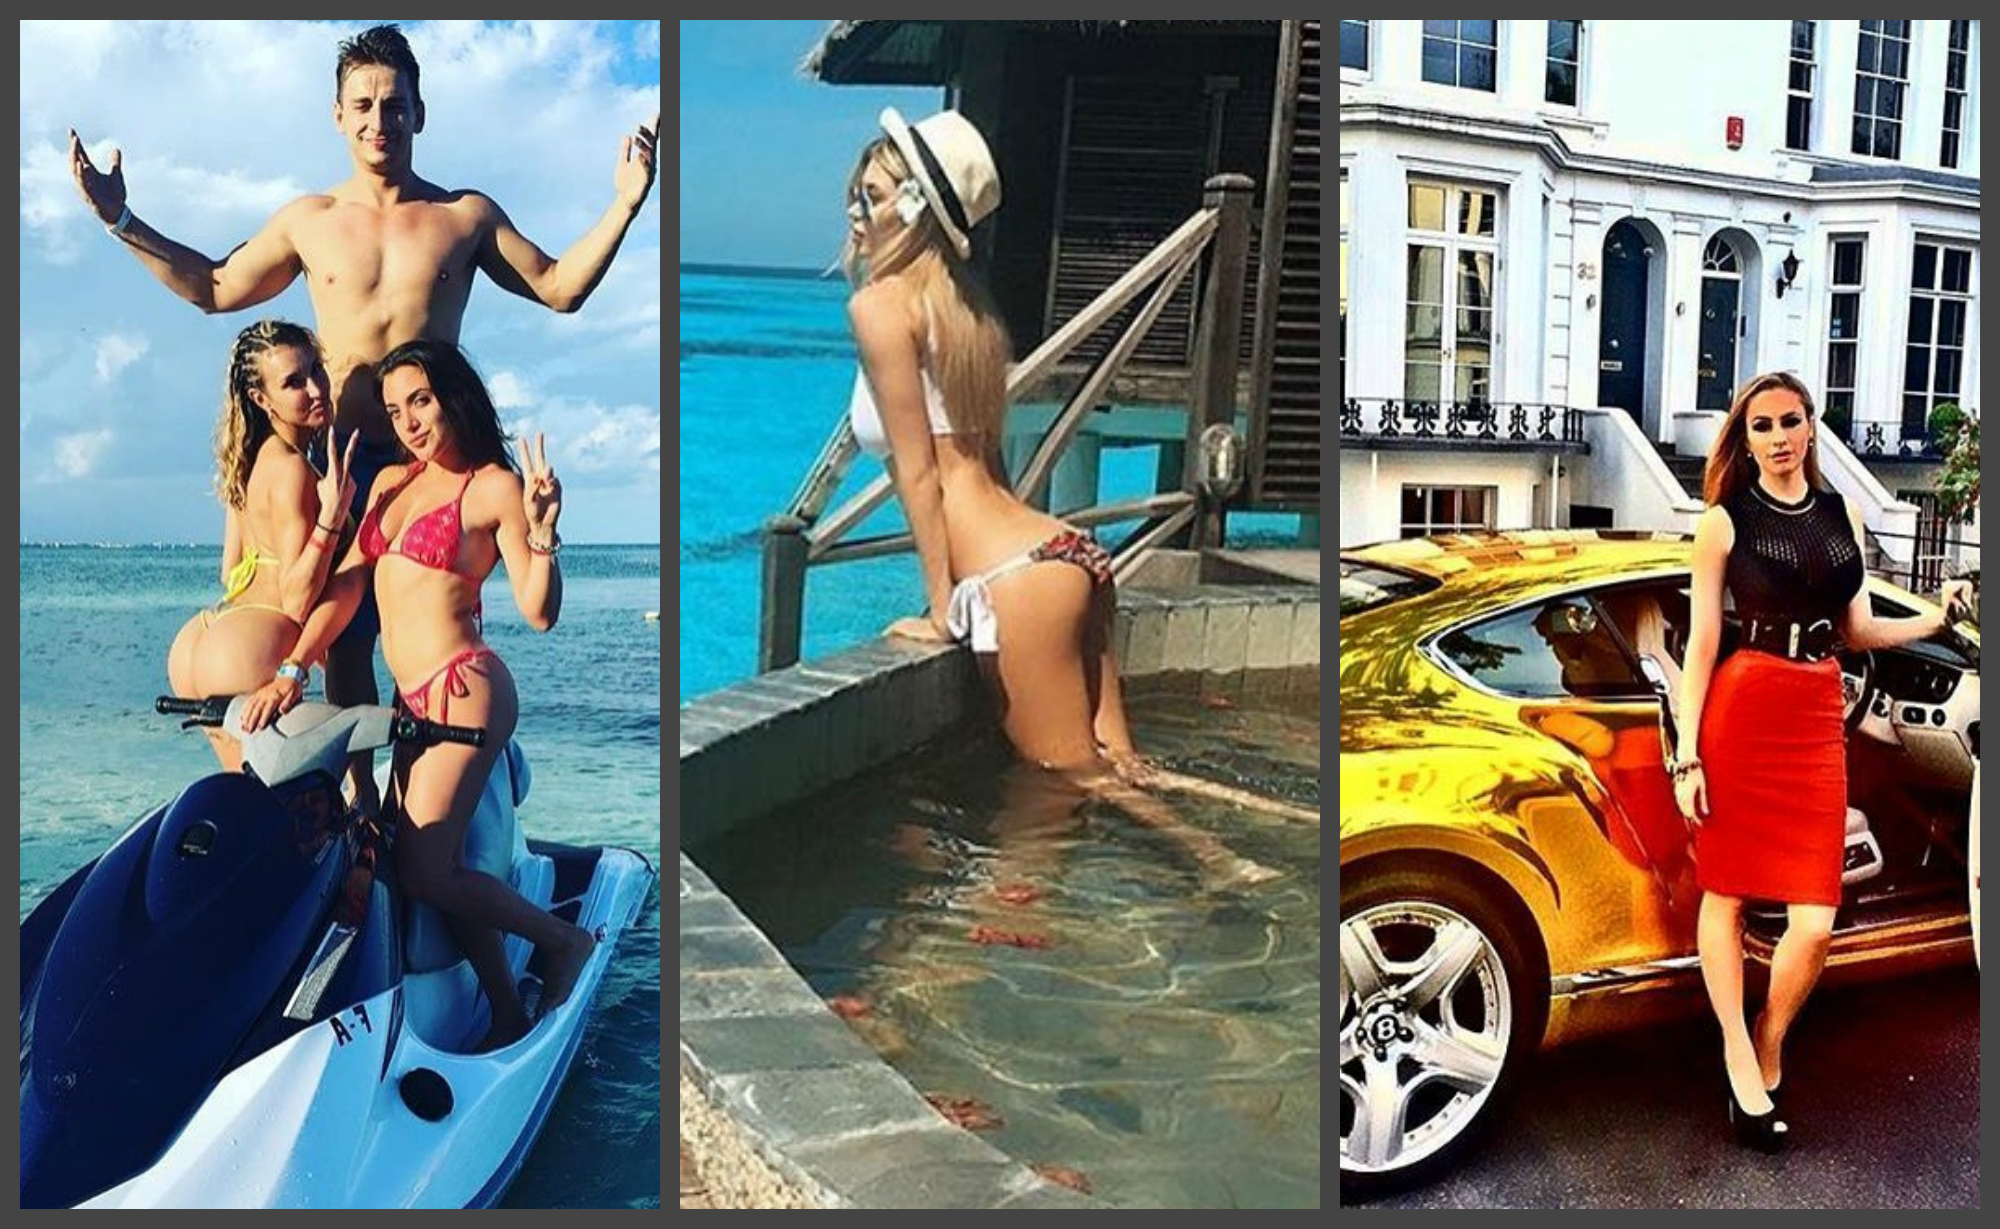 Shocking Photos of Instagram accounts of Rich Russian Kids